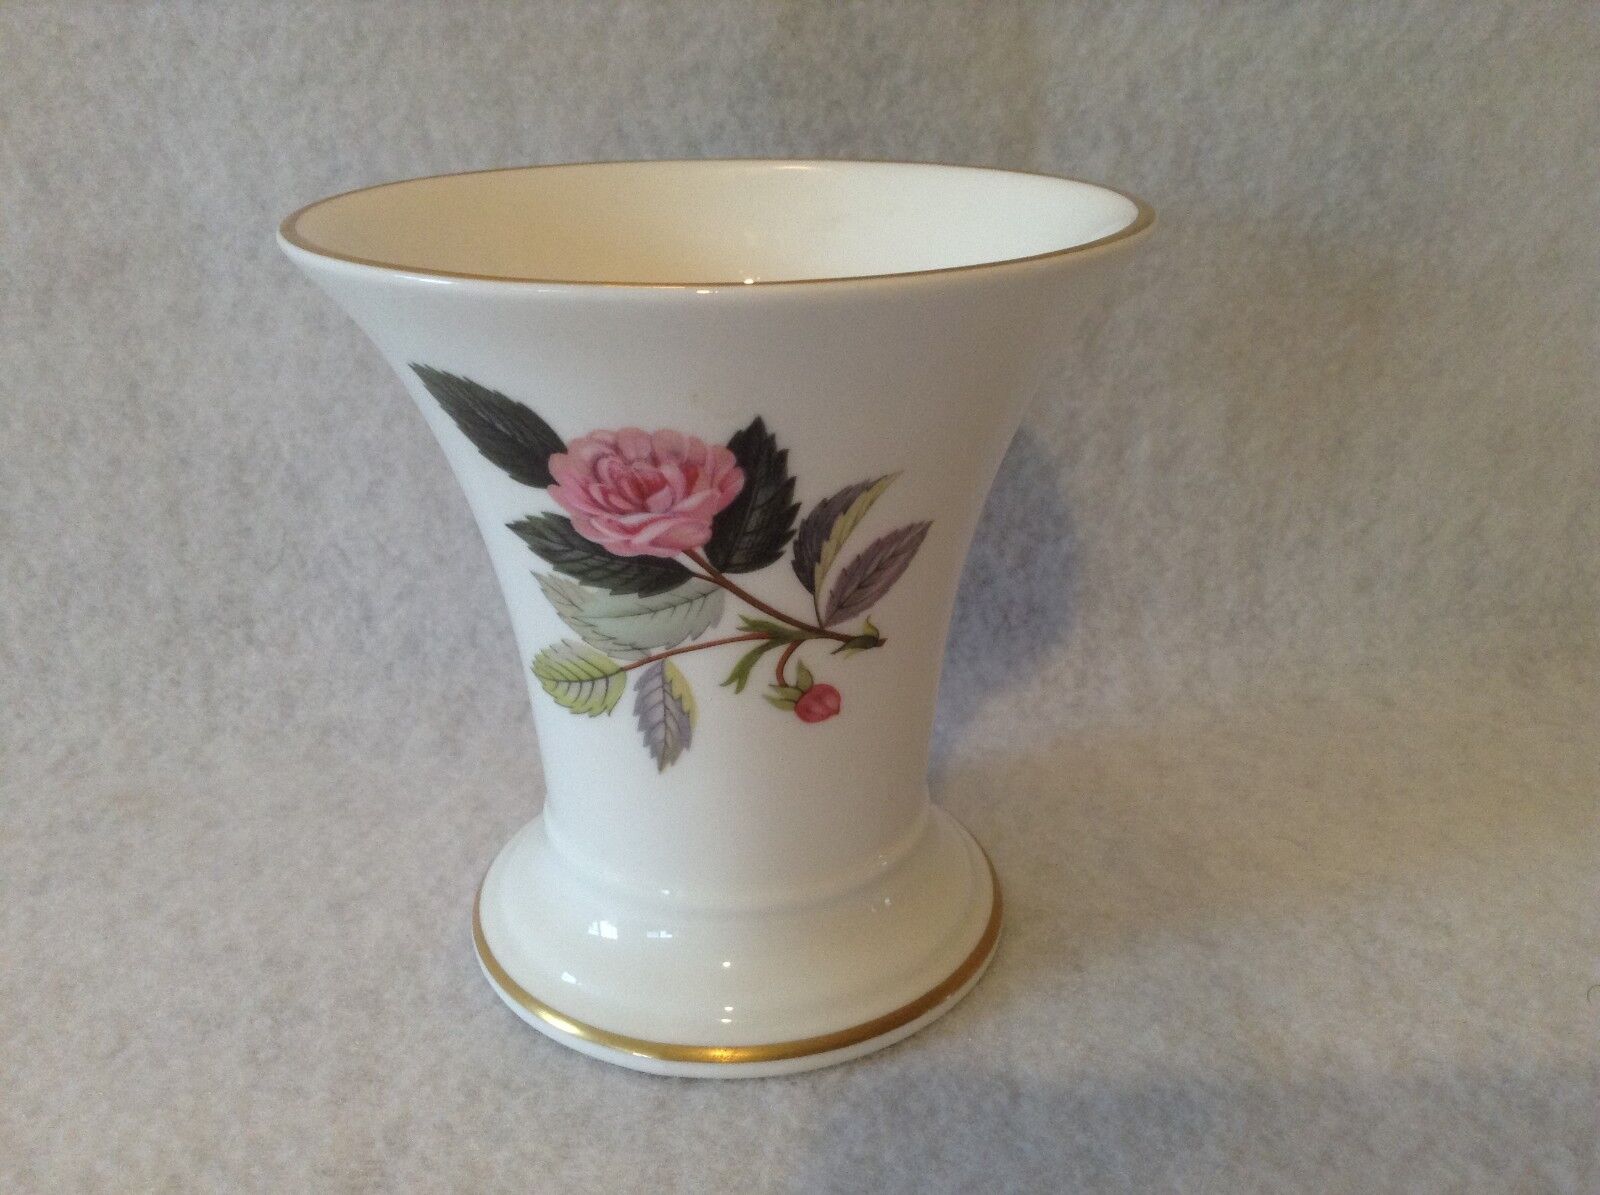 Wedgwood Vintage Bone China Hathaway Rose Flower Vase/Pencil Cup Collectible